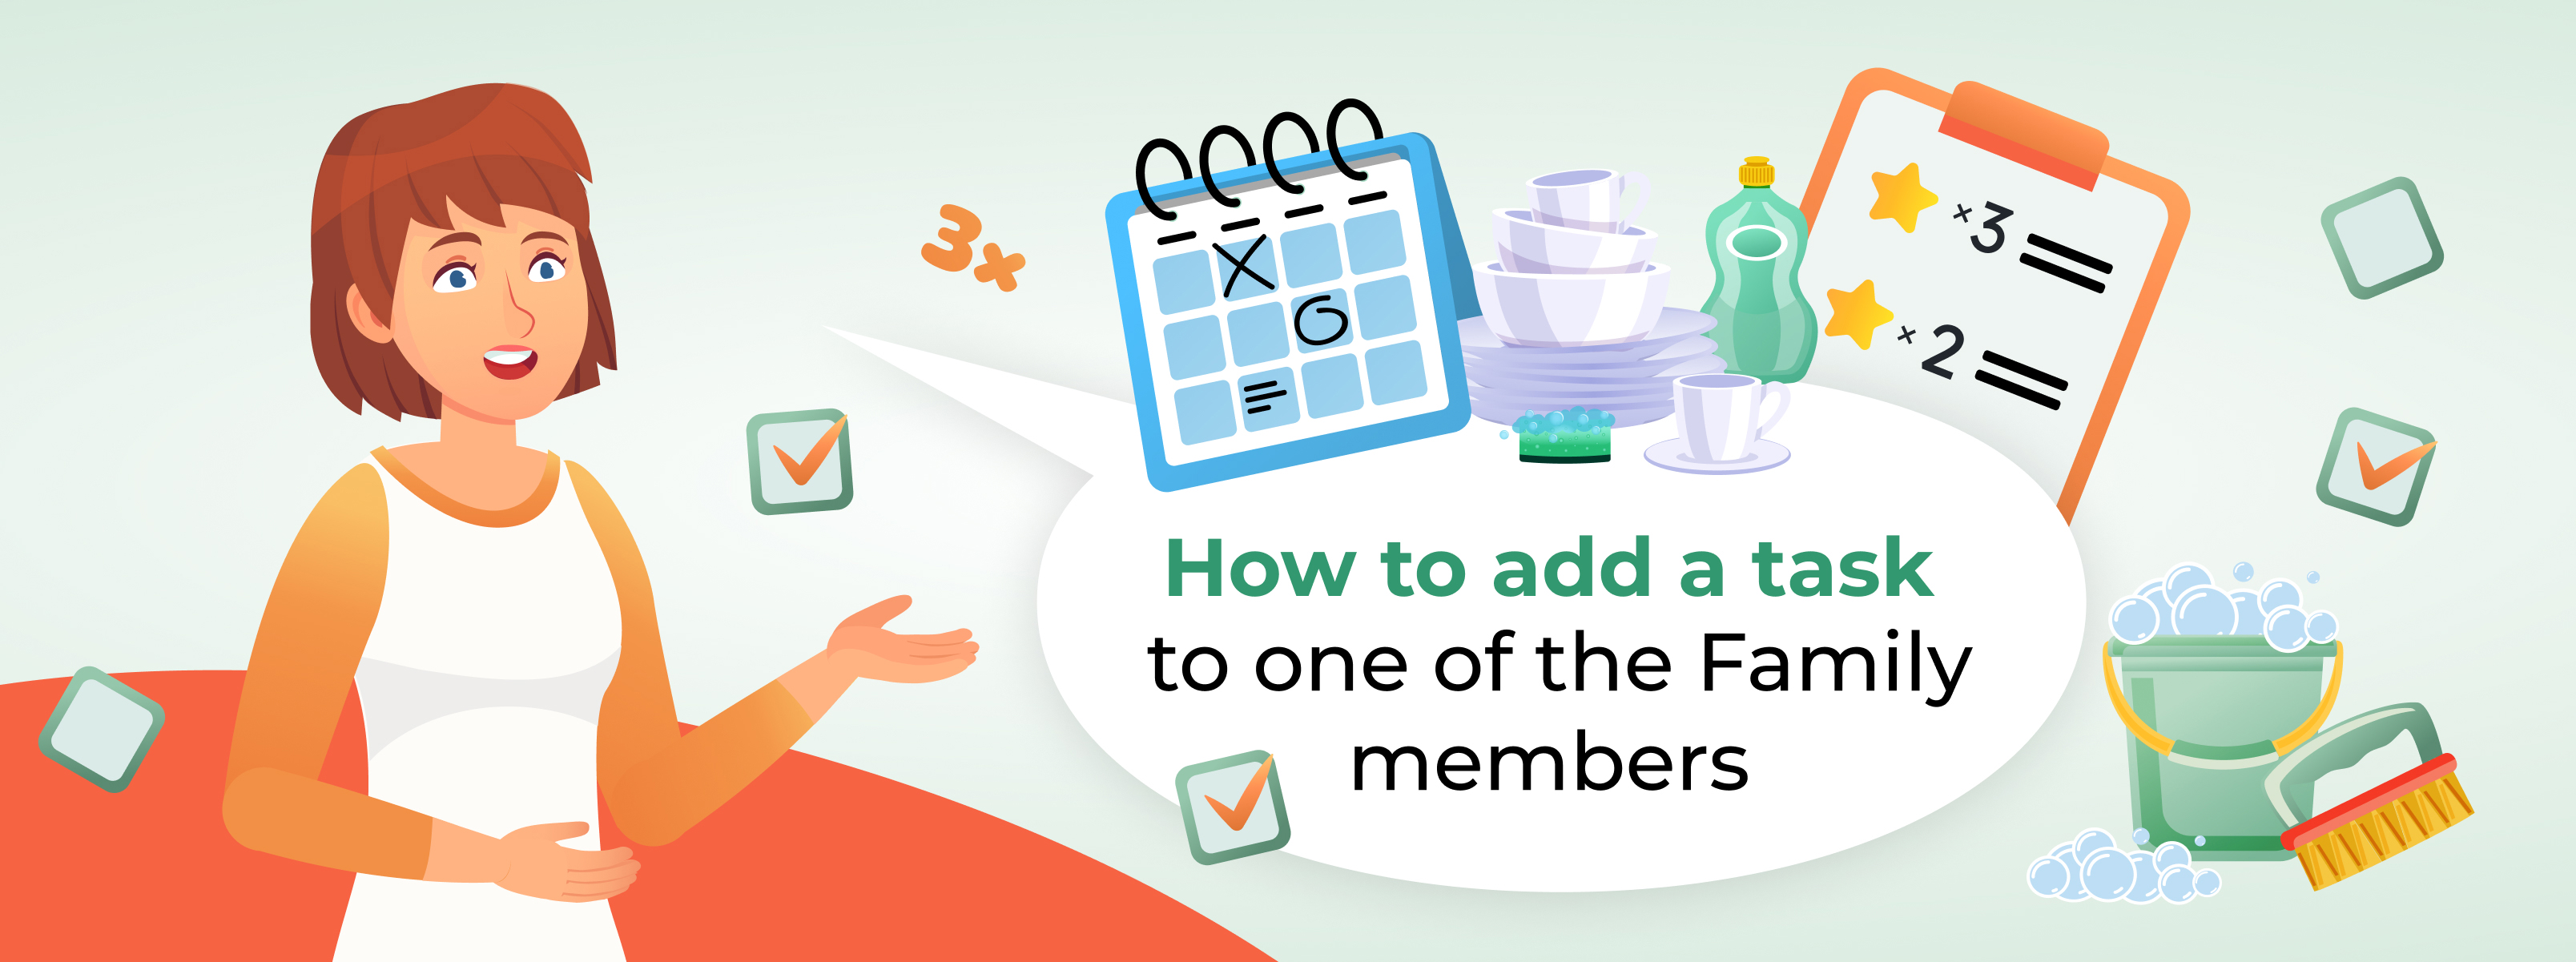 How to add a task in Famoty to one of the Family members?